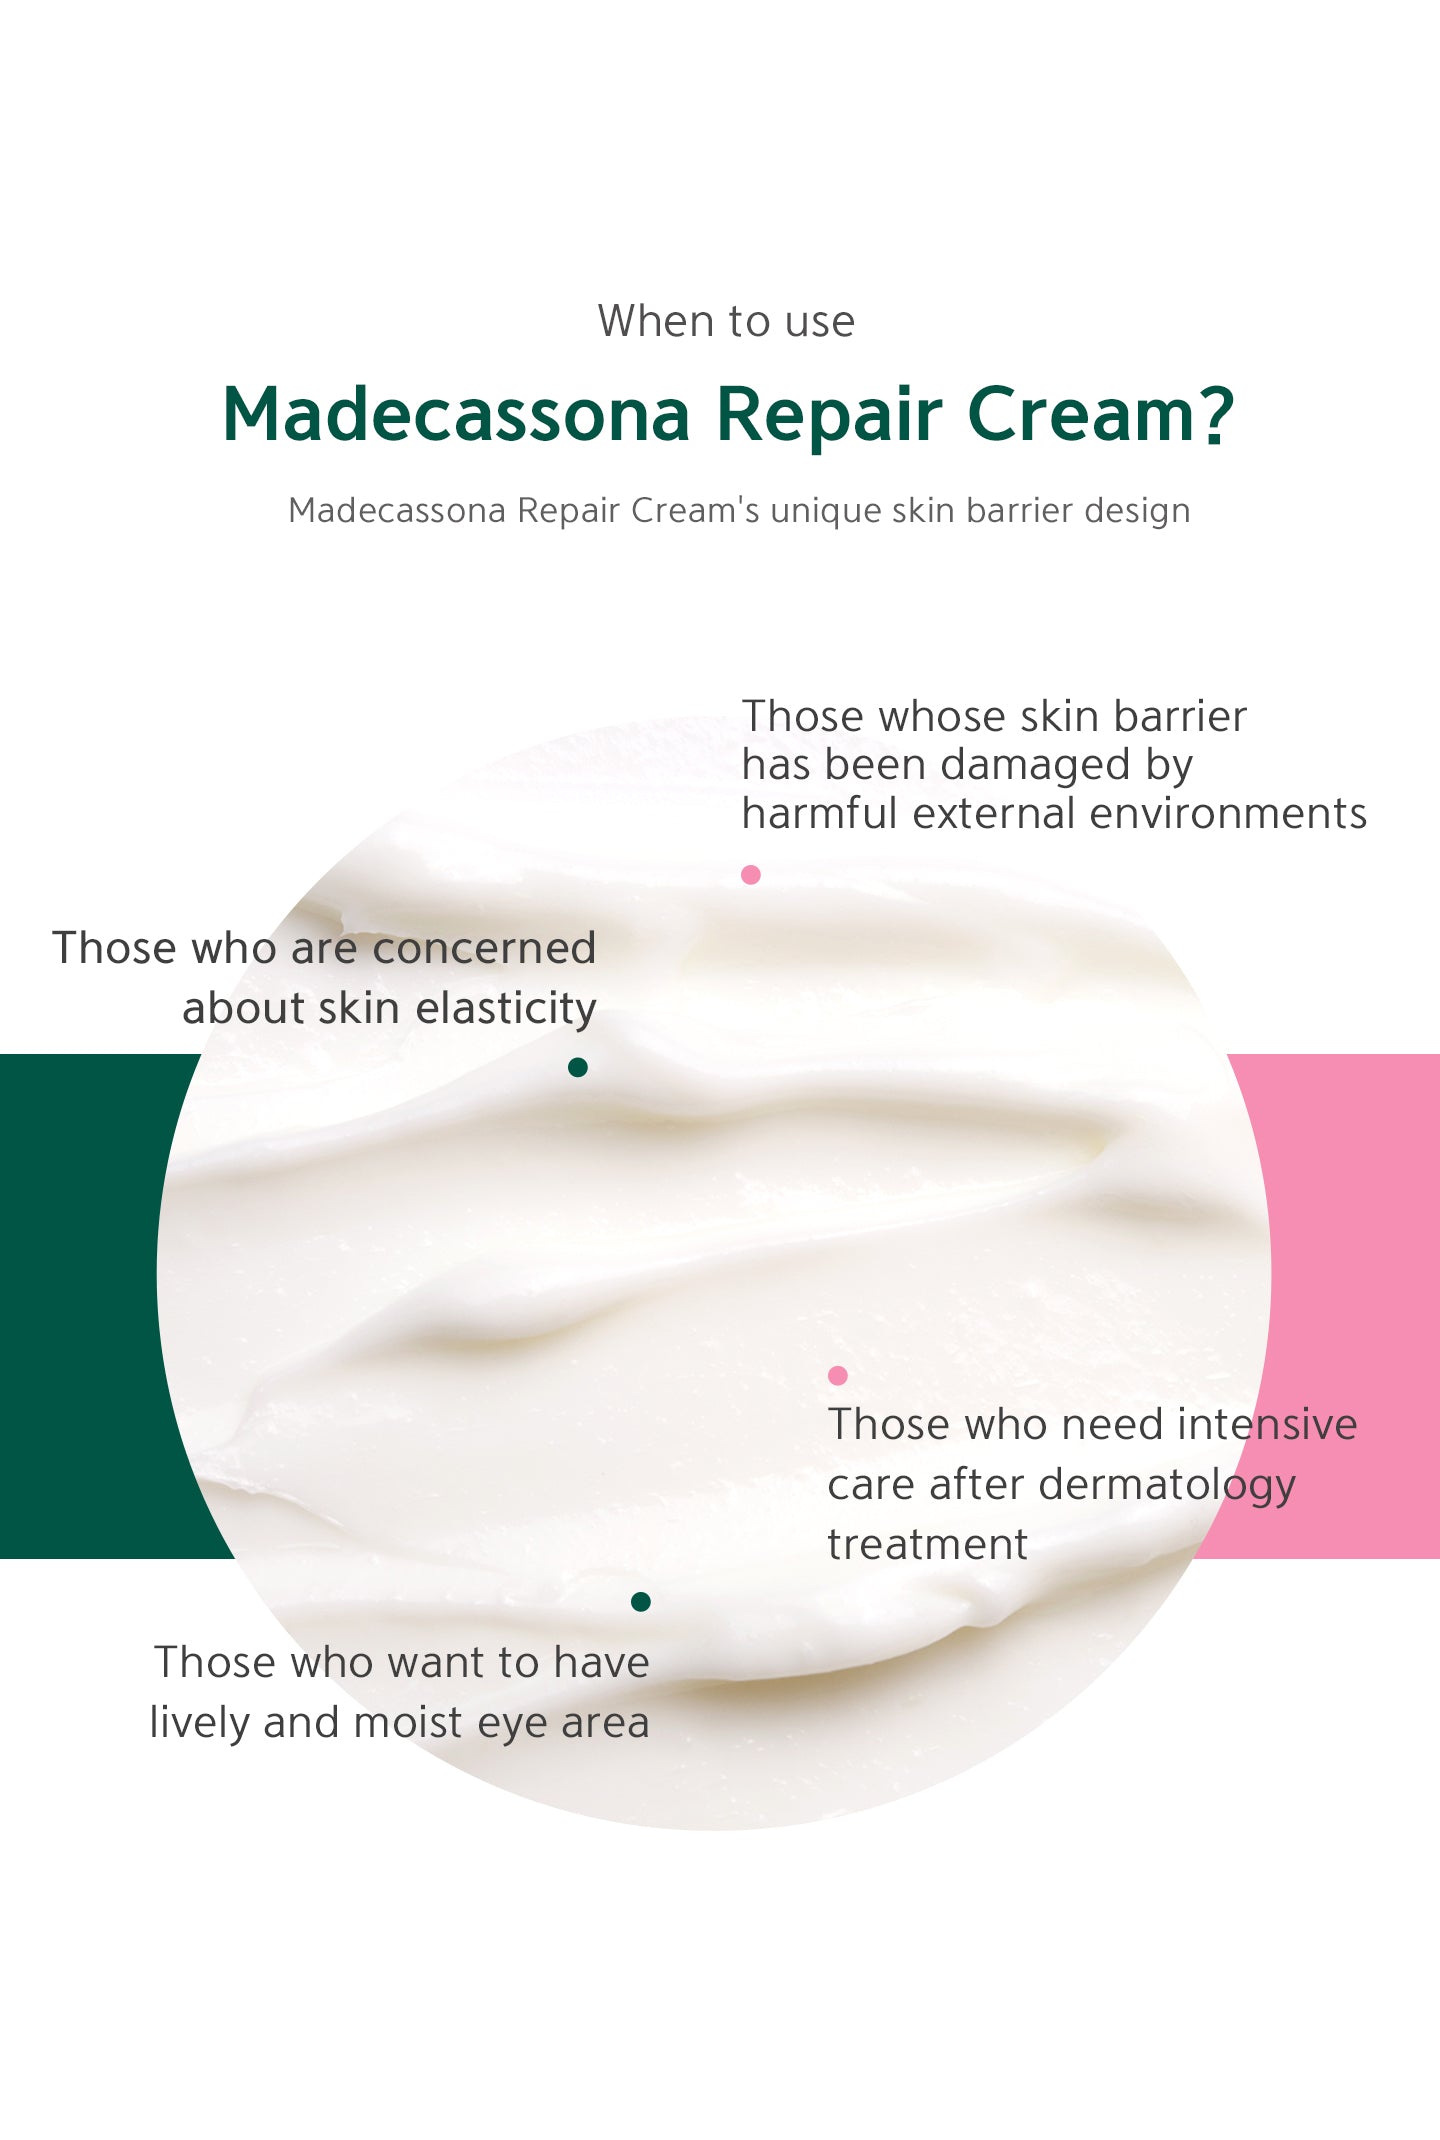 When to use madecassona repair cream? For those whose skin barrier has been damaged by harmful external environments, who are concerned about skin elasticity, who need intensive care after dermatology treatment, who want to have lively and moist eye area.